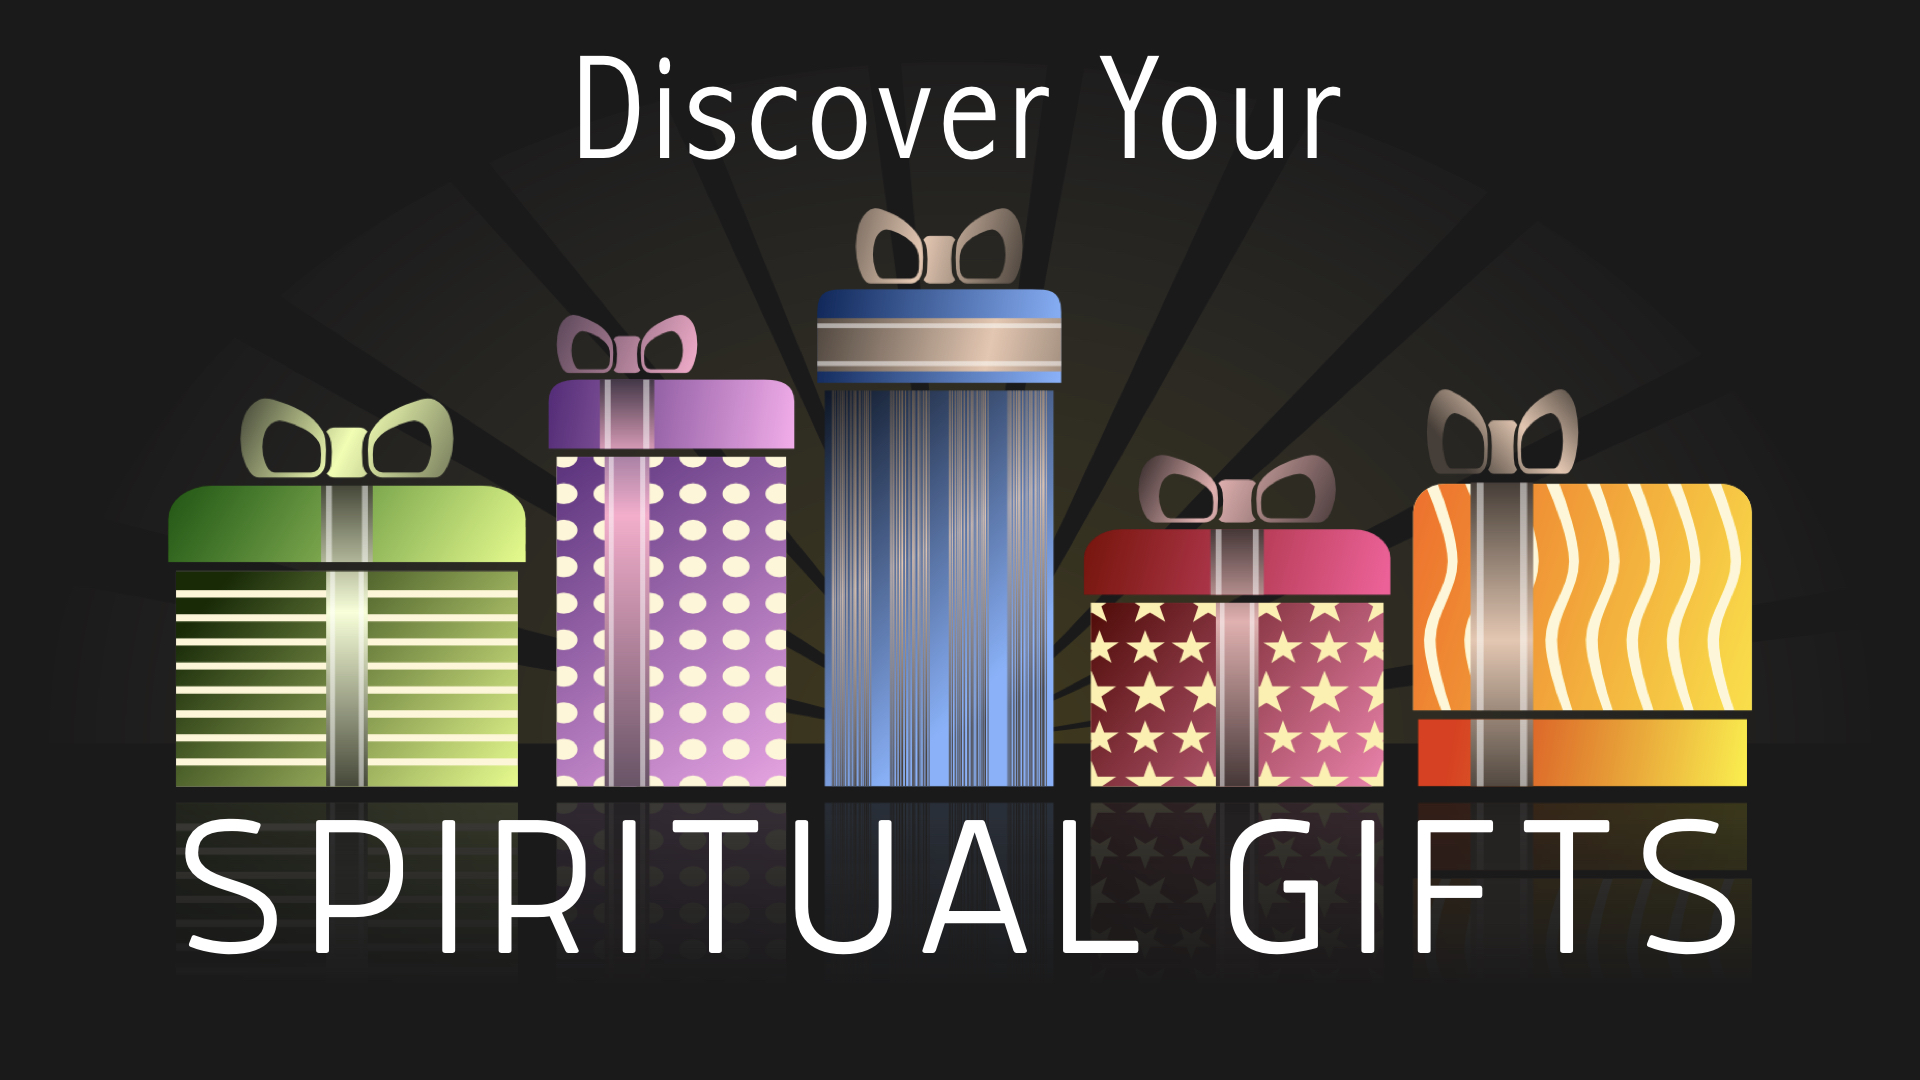 What Are The Main Spiritual Gifts